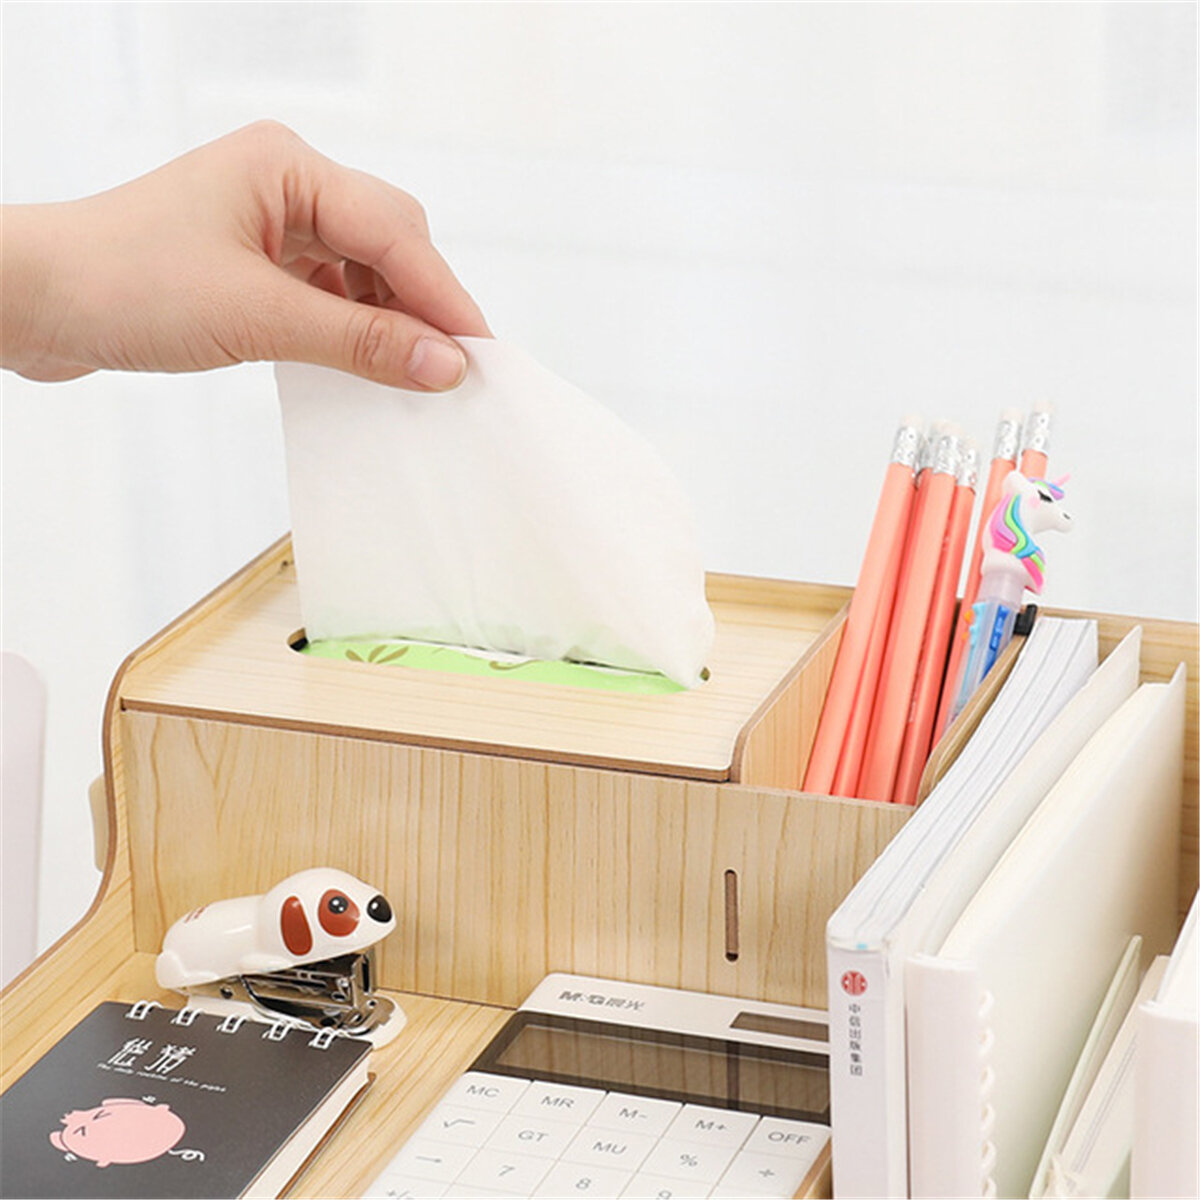 Stationery Container Desktop Drawer Organizer Desktop Storage Box Brush Container Office Pencil Holder Pen Box Tool Gift For Students Childs COD